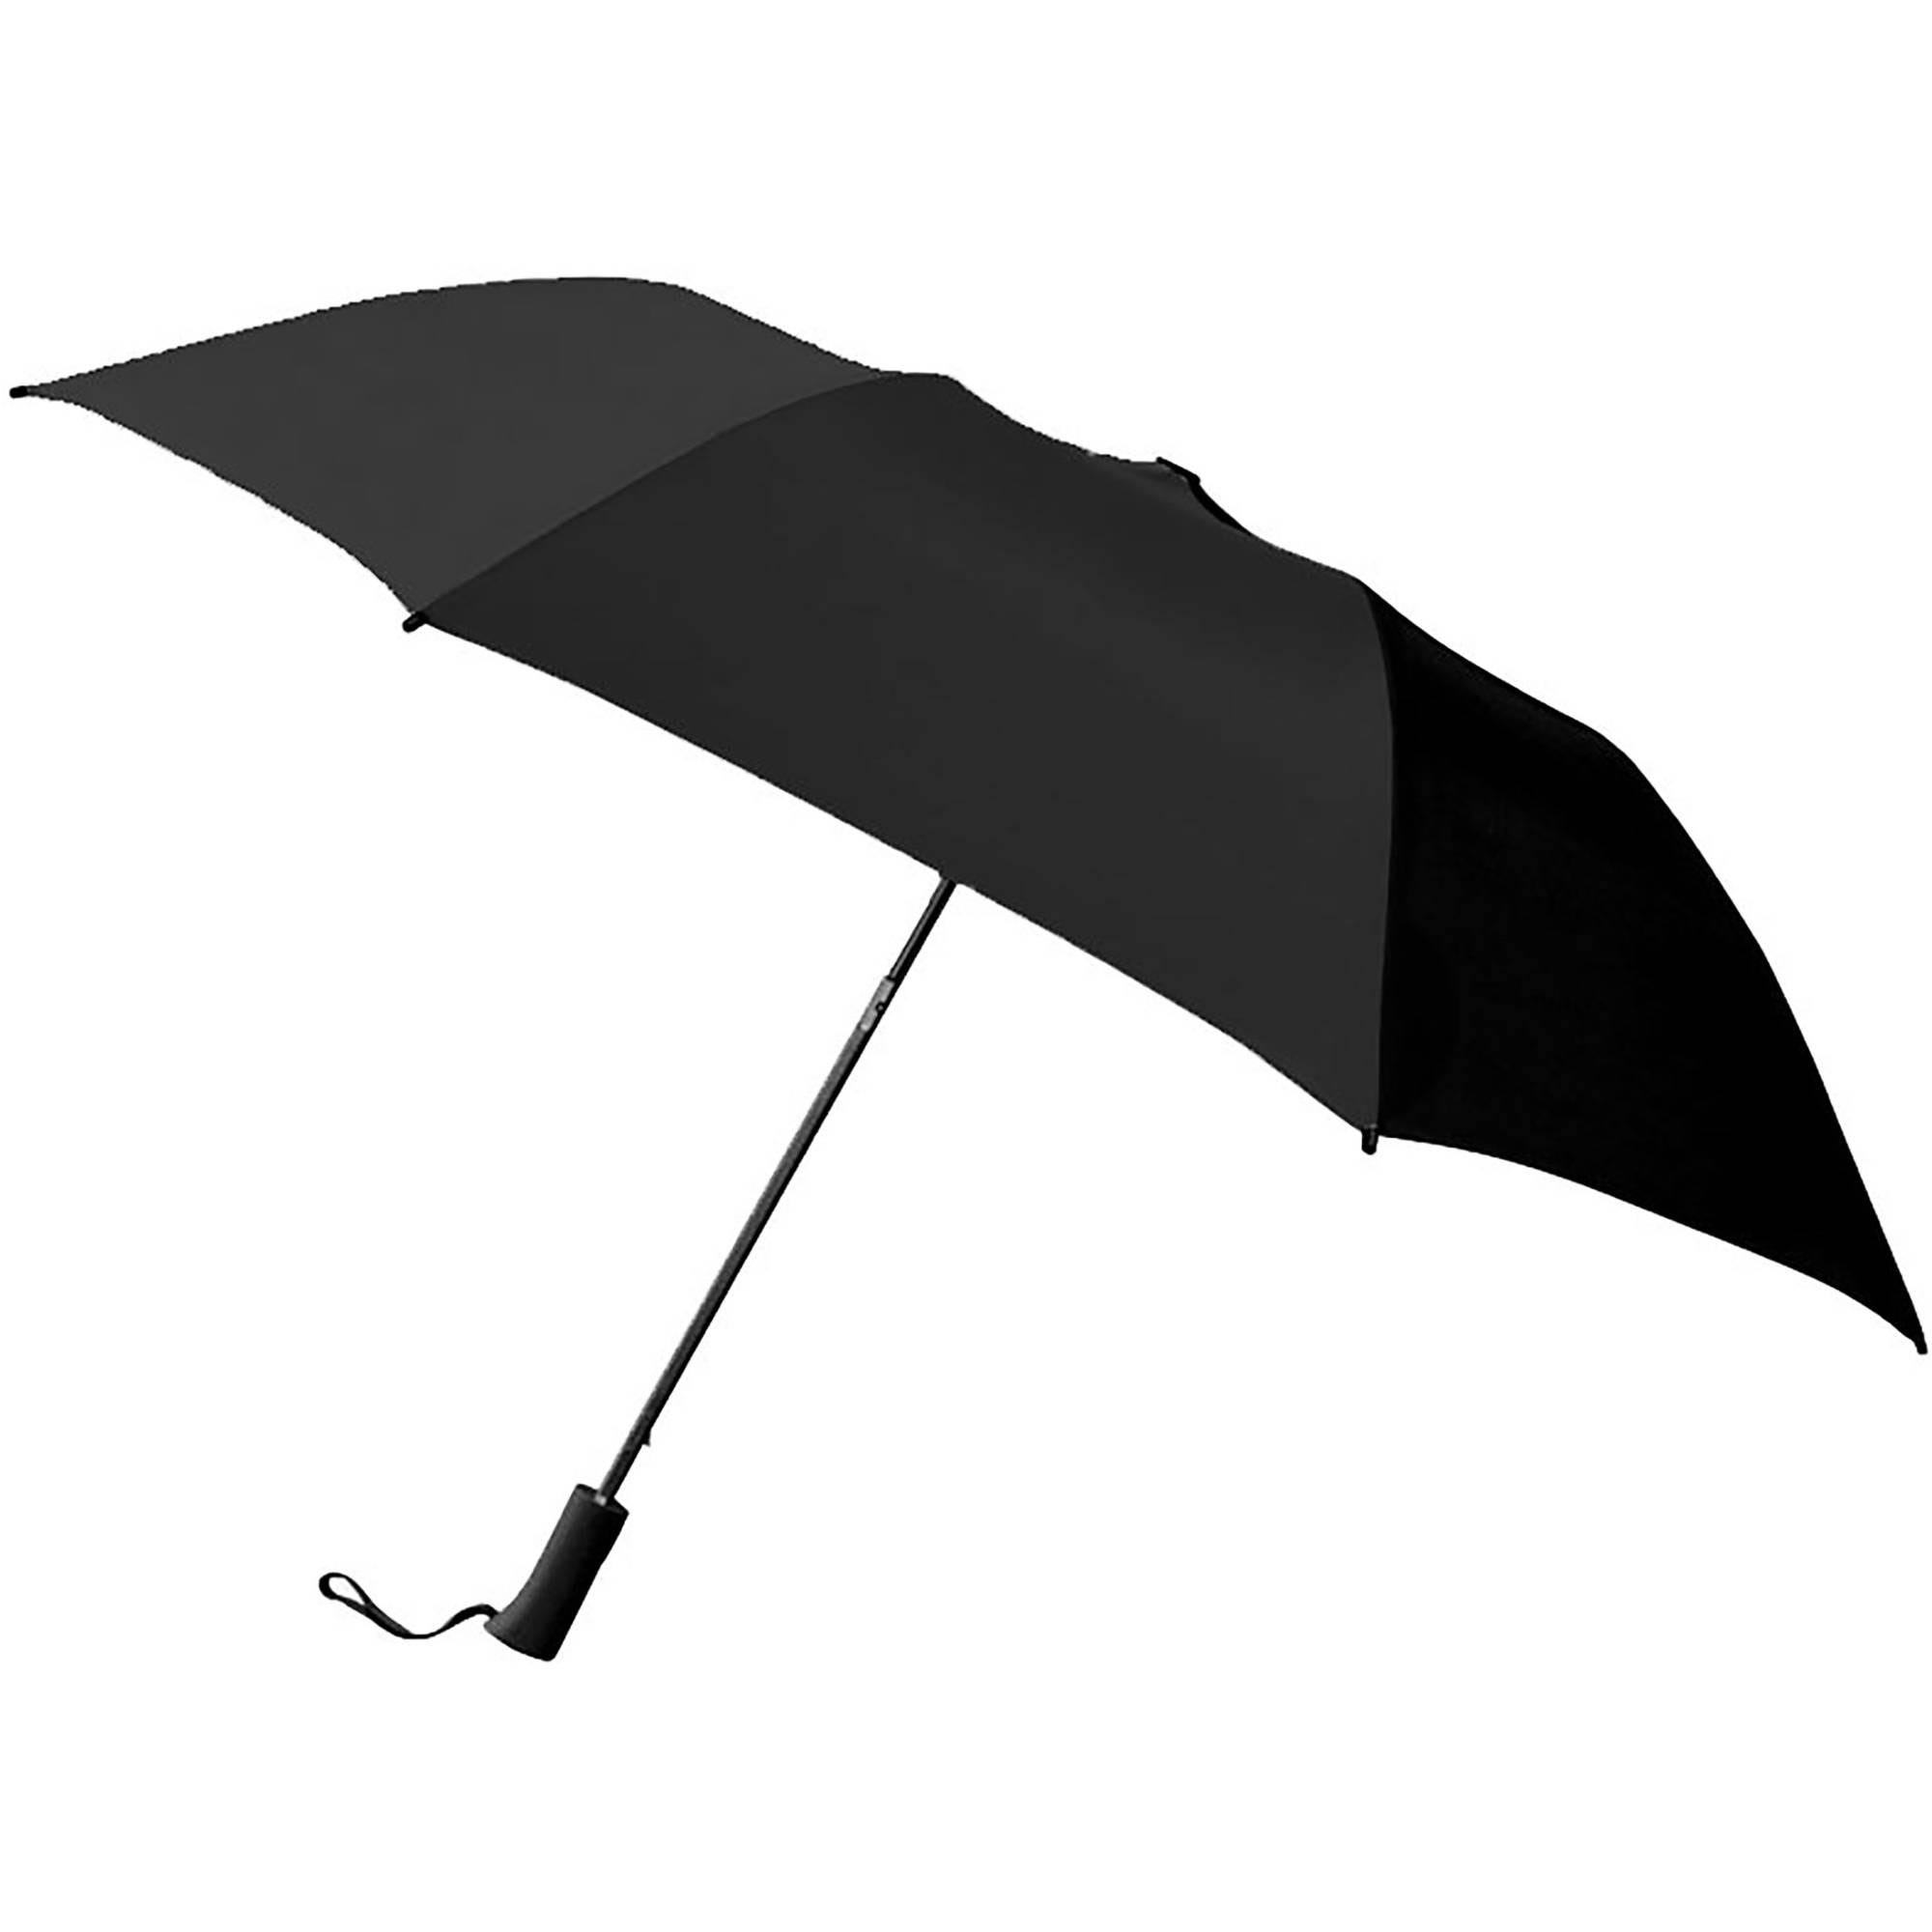 Chaby Golf Size Umbrella With Mesh Bag - Black, 56"